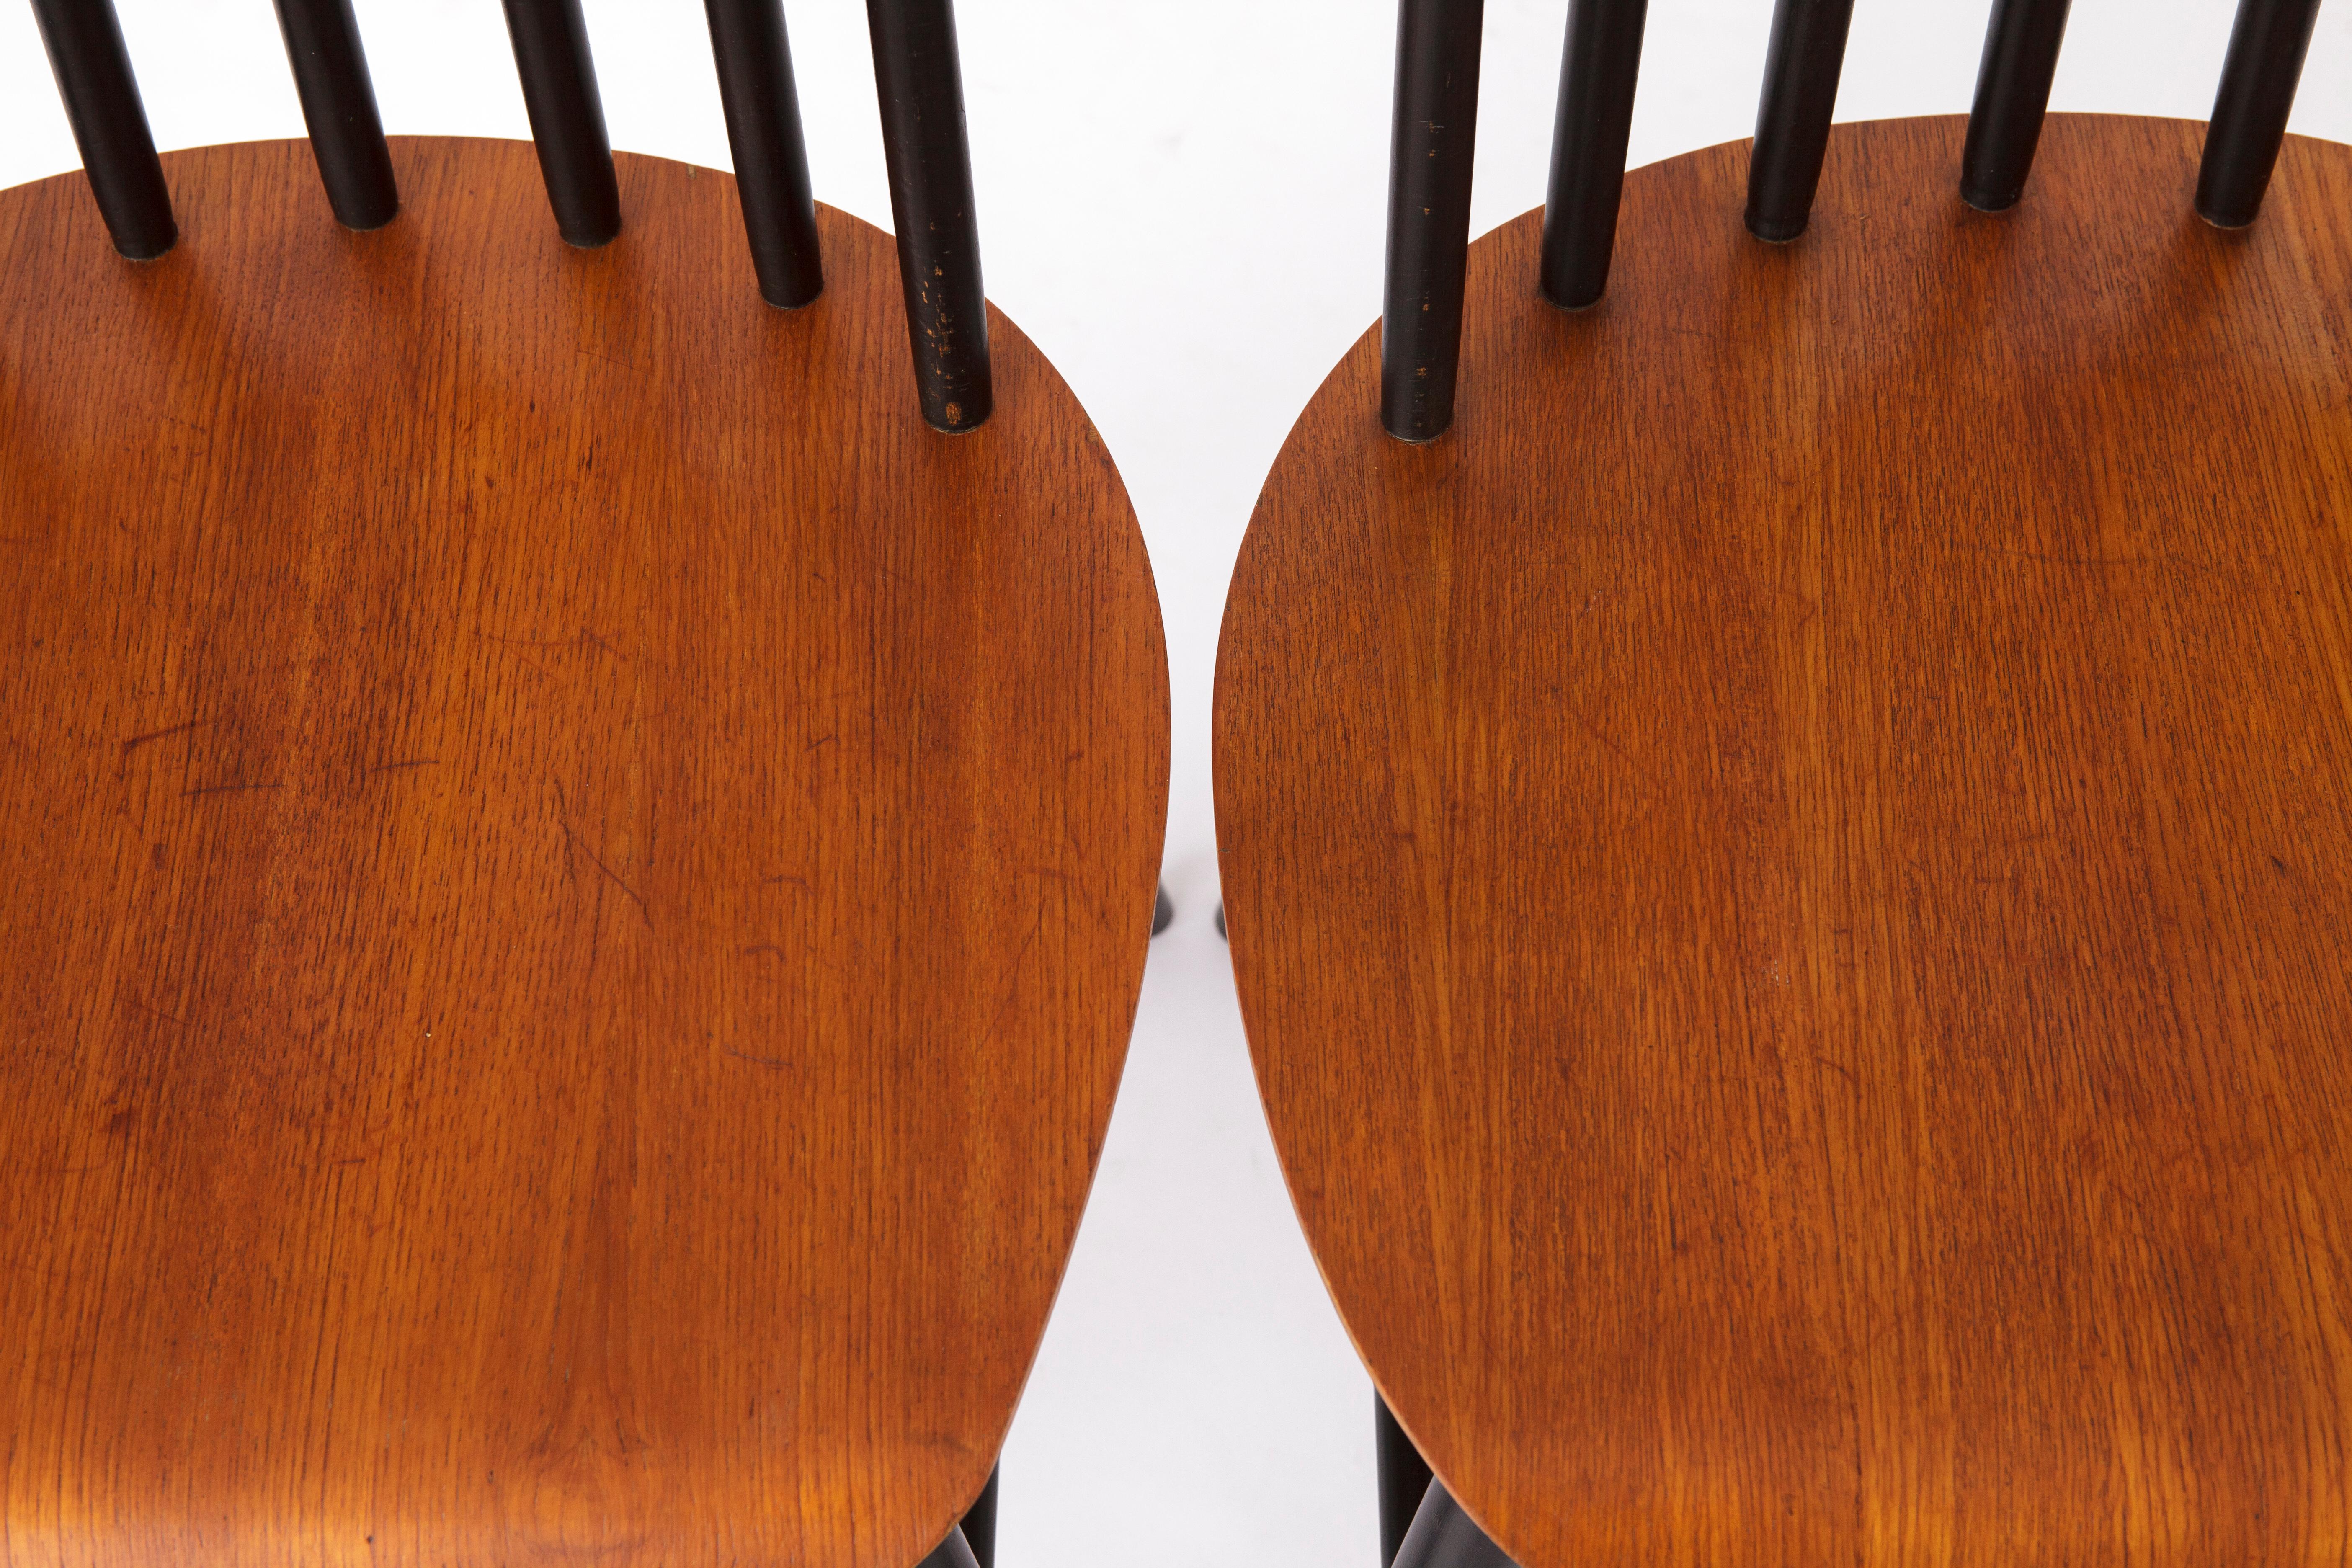 2 Vintage Spindle Back Chairs 1960s-1970s - Sweden In Good Condition For Sale In Hannover, DE